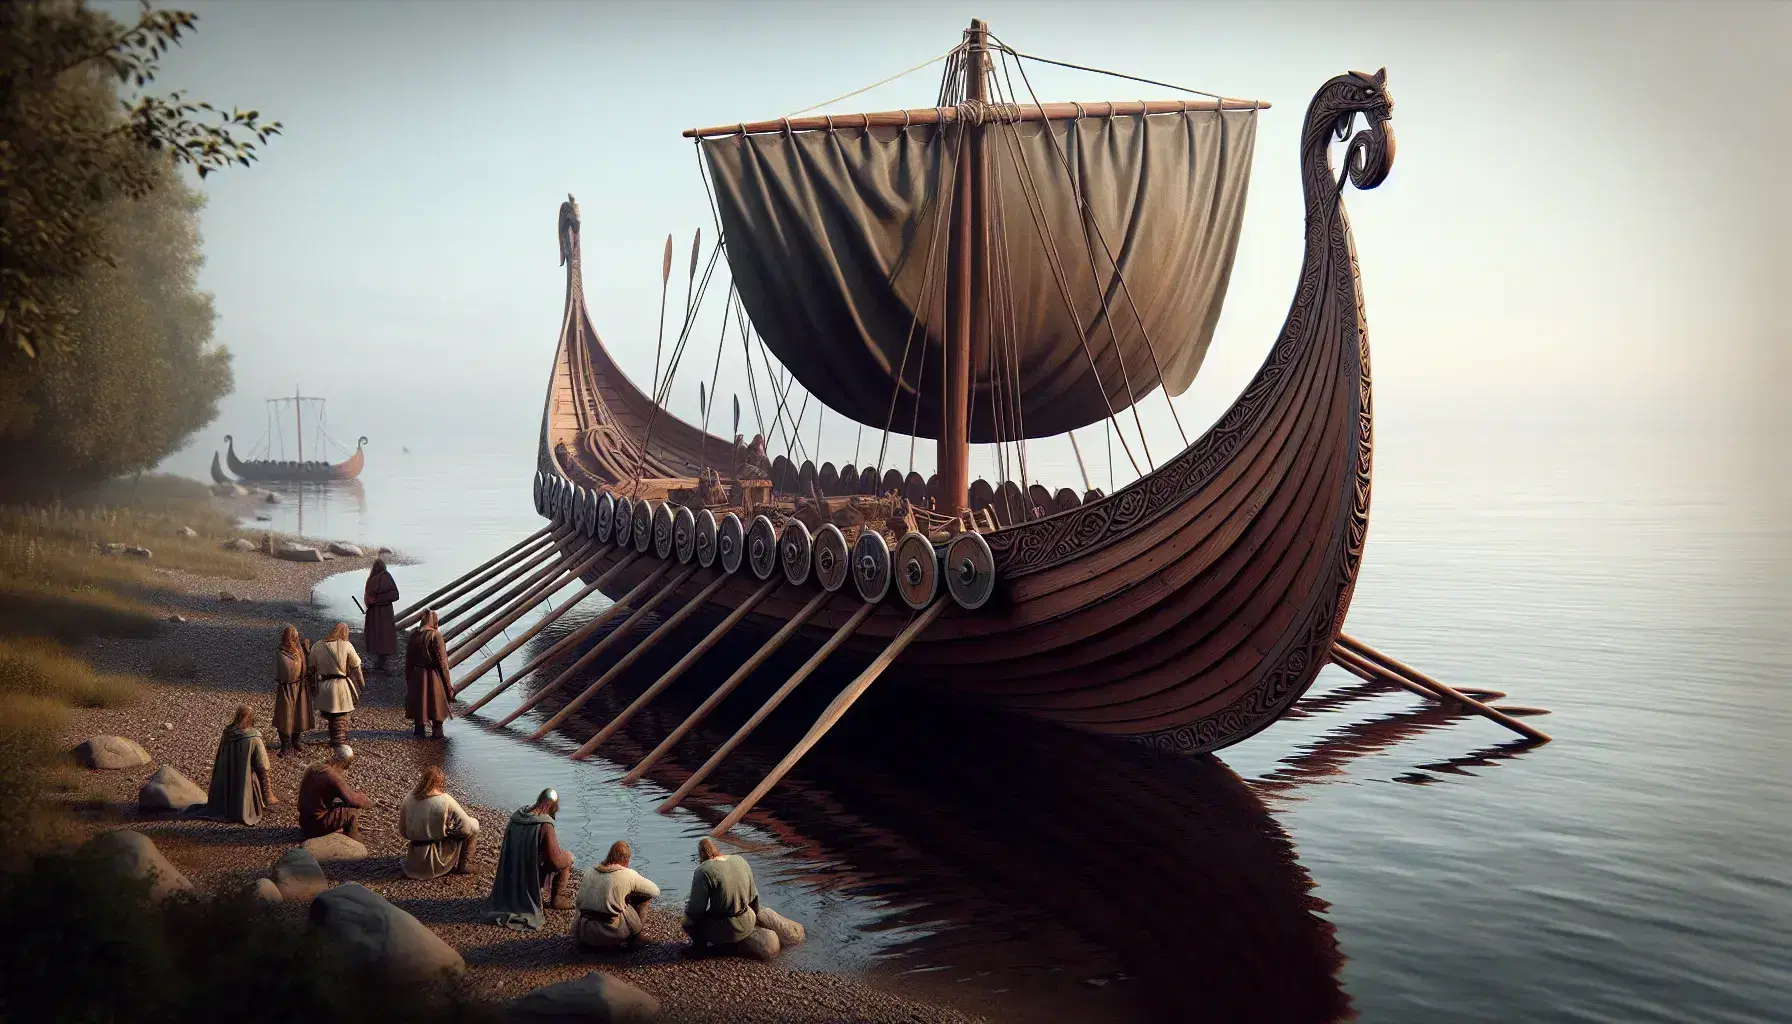 Viking longship on serene shore with carved dragon heads, a central mast with furled sail, and three figures attending to maritime tasks.